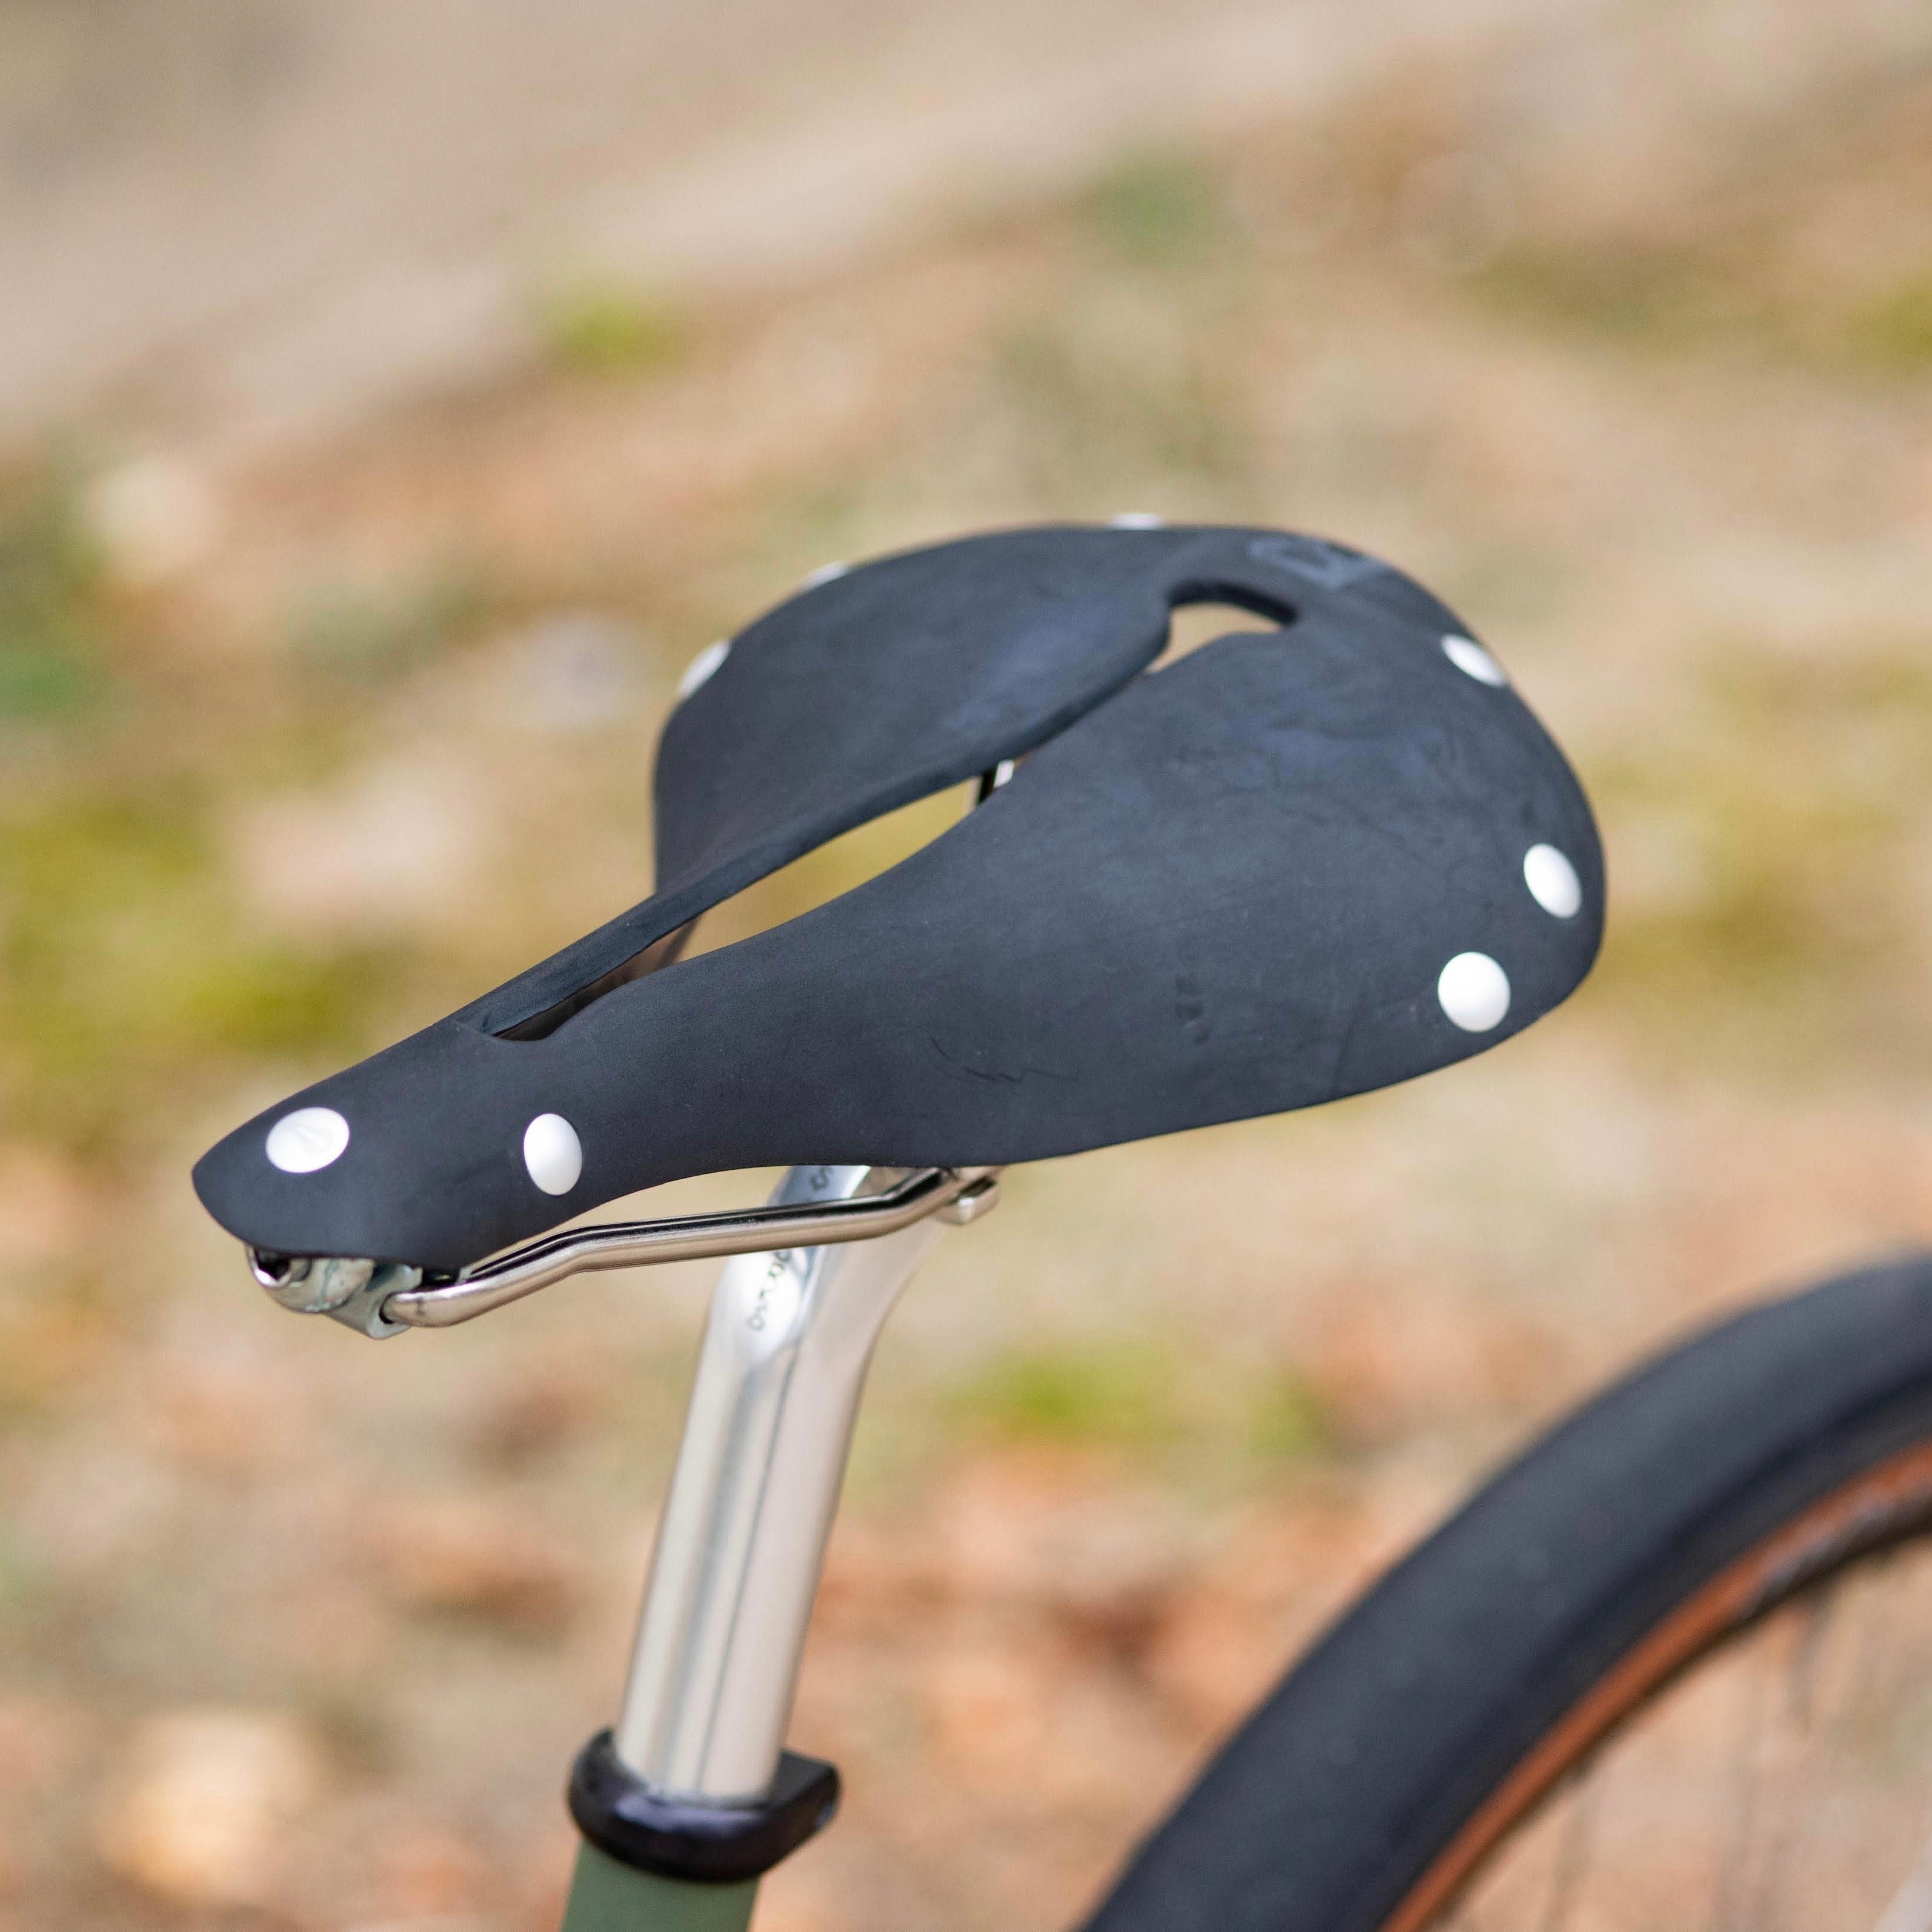 SELLE ANATOMICA R2 Rubber Saddle – SimWorks Online Store